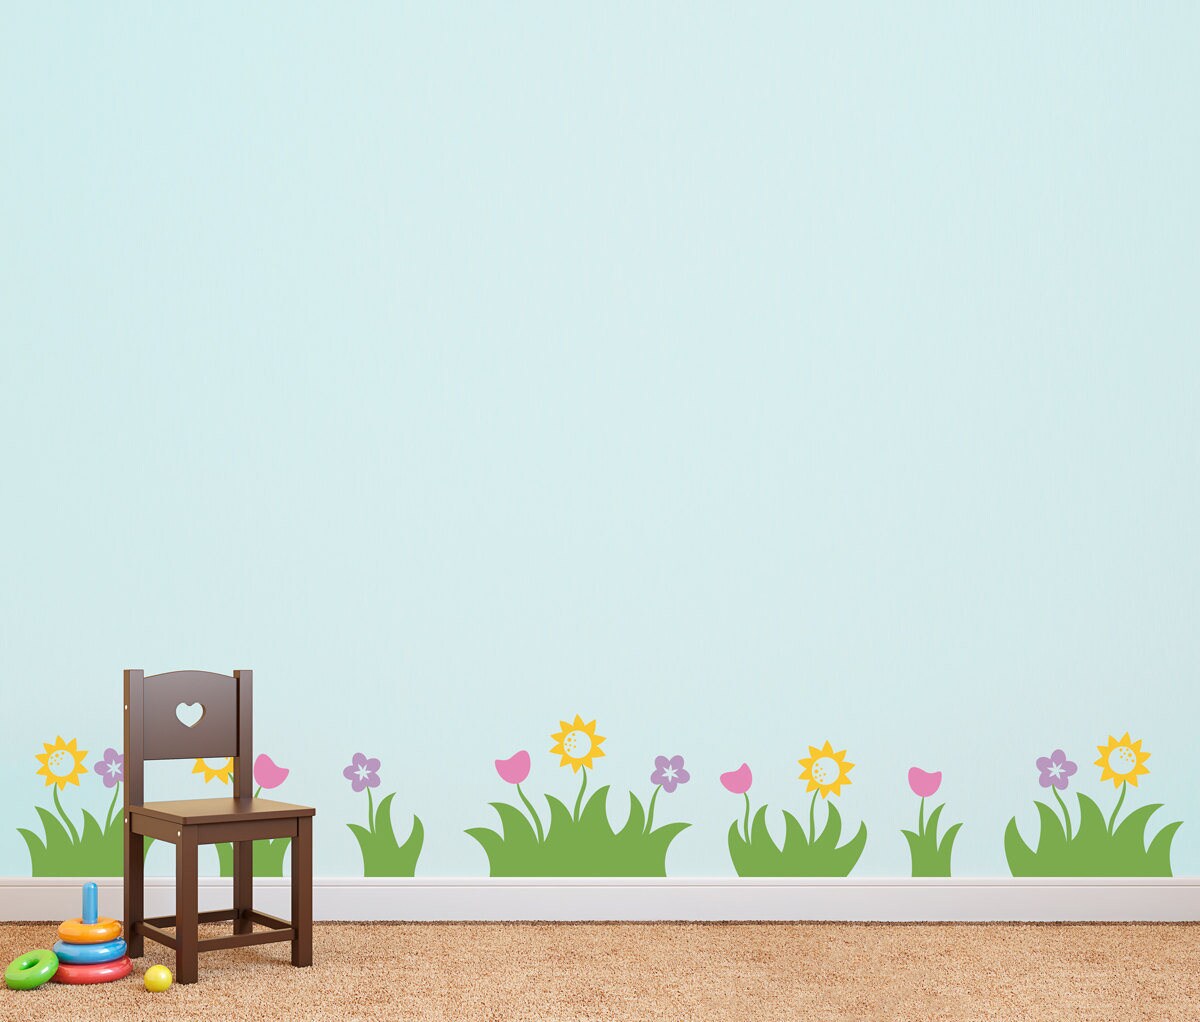 Grass and Flowers Wall Decal - Set of 7 Grass Patches with flowers - Grass Decals - Kids Bedroom Decal